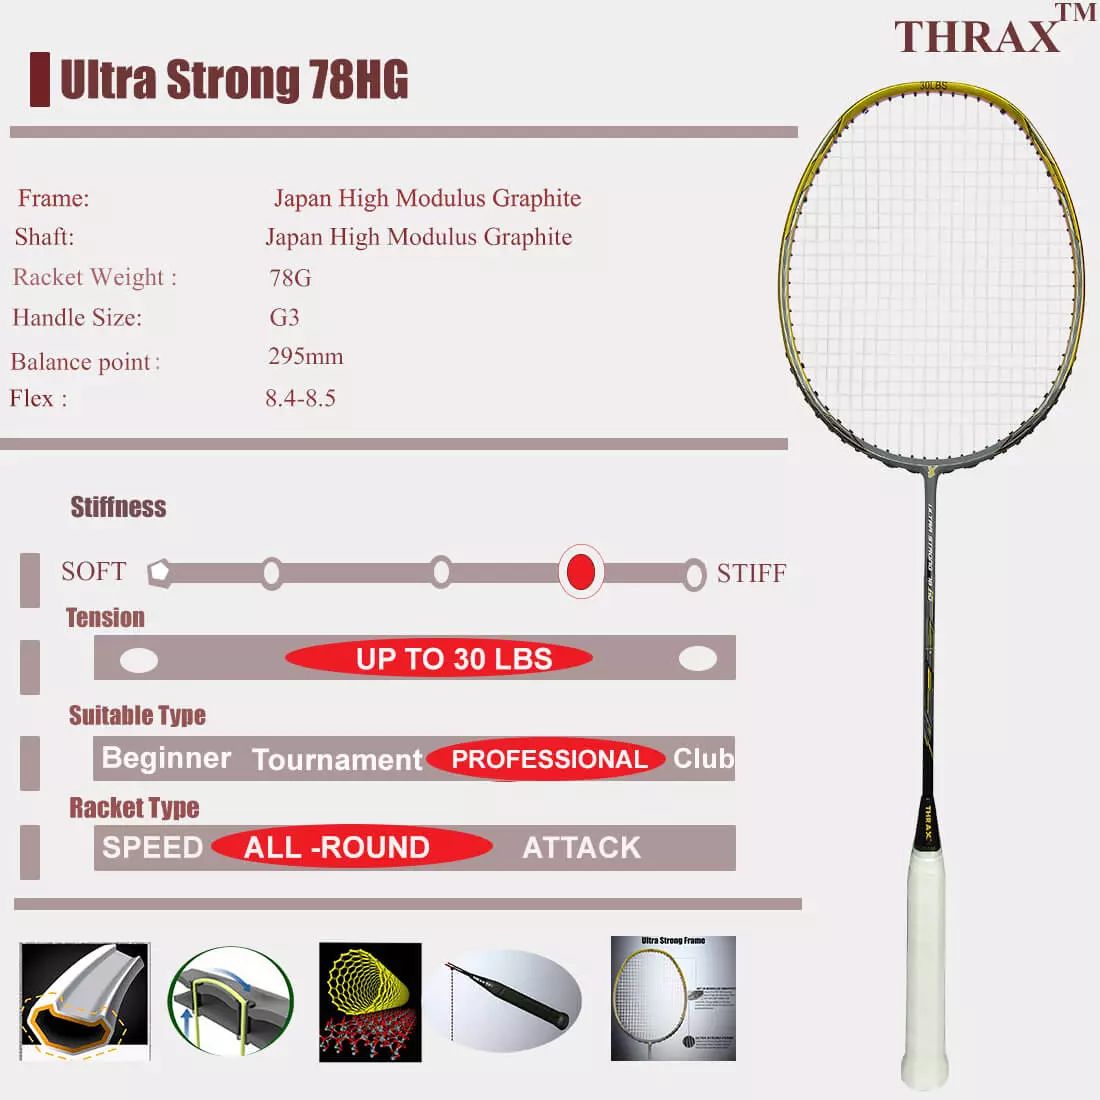 Thrax_Ultra_Strong_78HG_Badminton_Racket_Specification